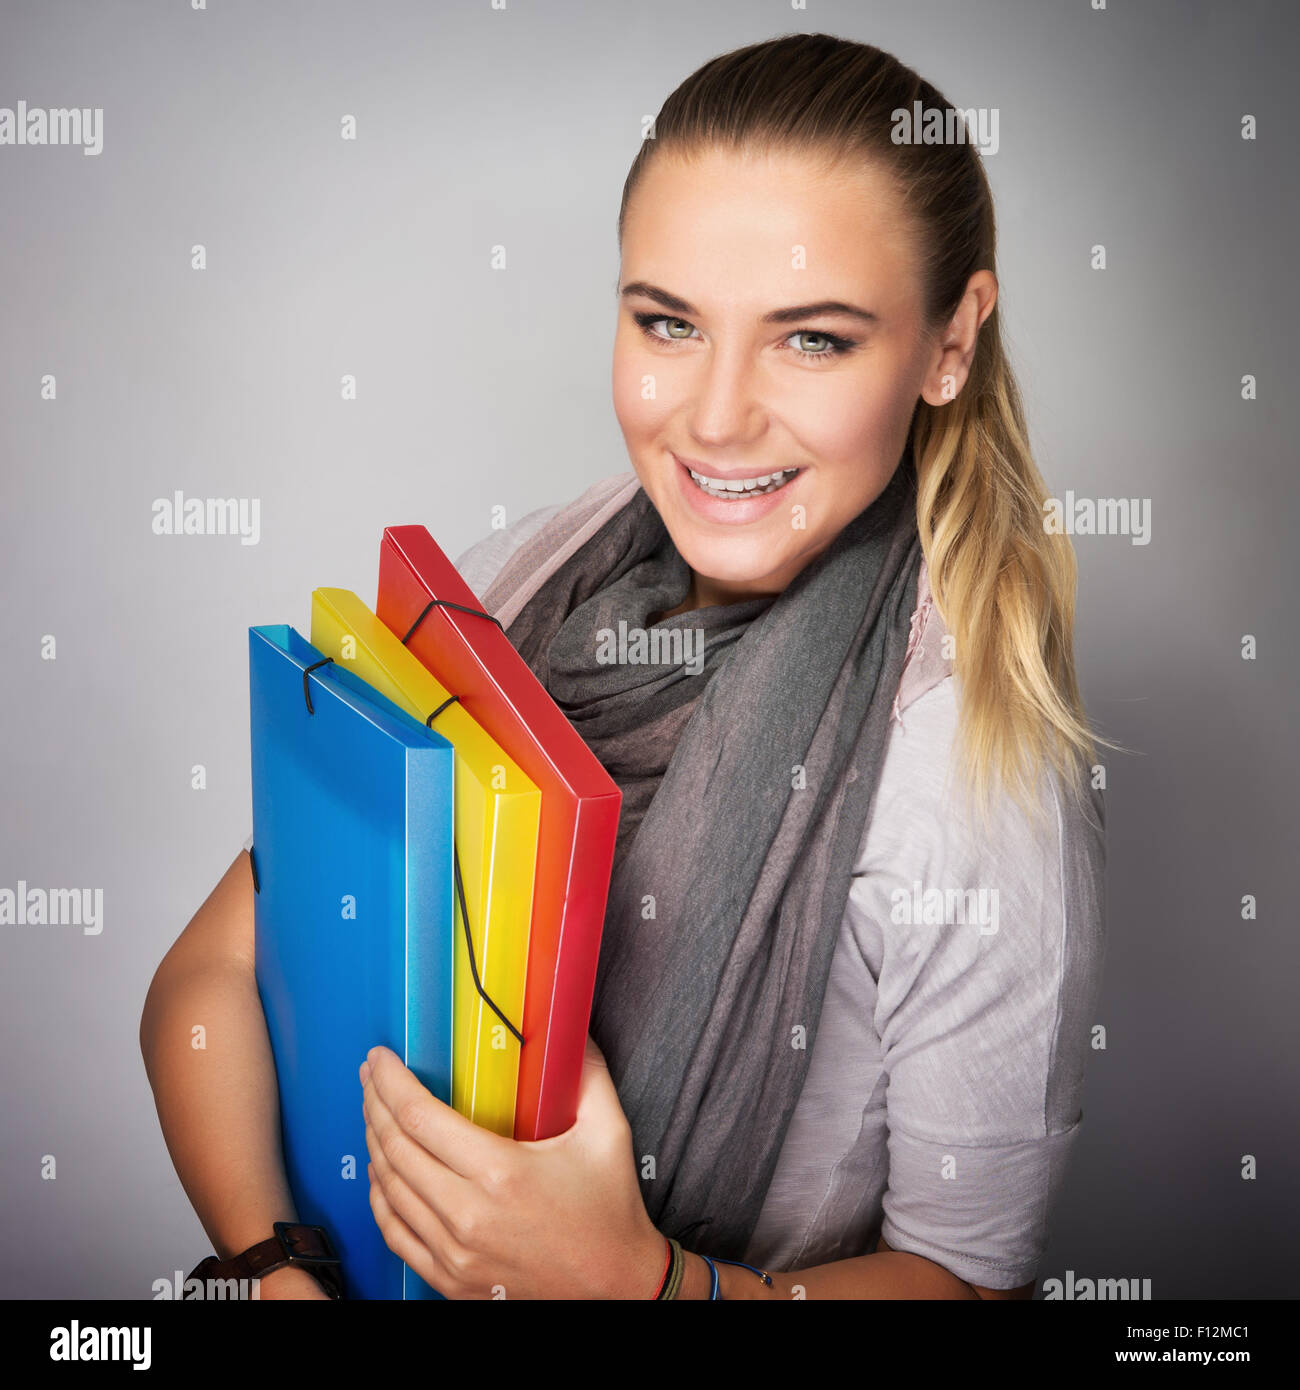 Portrait of beautiful happy student girl with colorful folders in hands over gray background, enjoying start of education Stock Photo